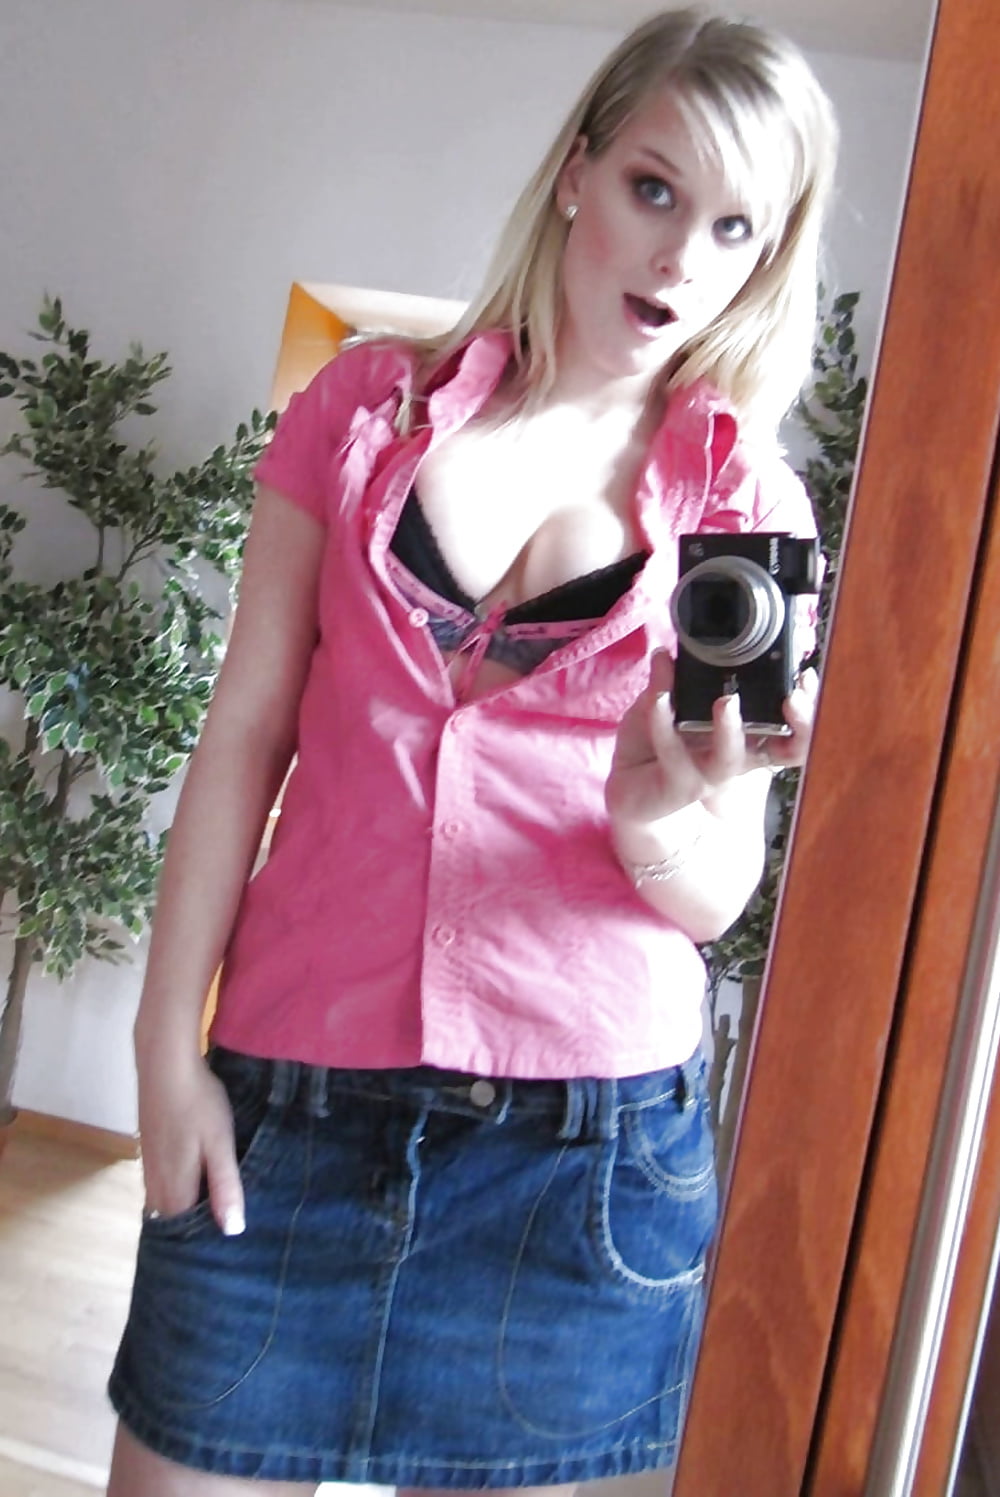 Sex Gallery Private Self-Shot session of a young cute blond Teen Girl